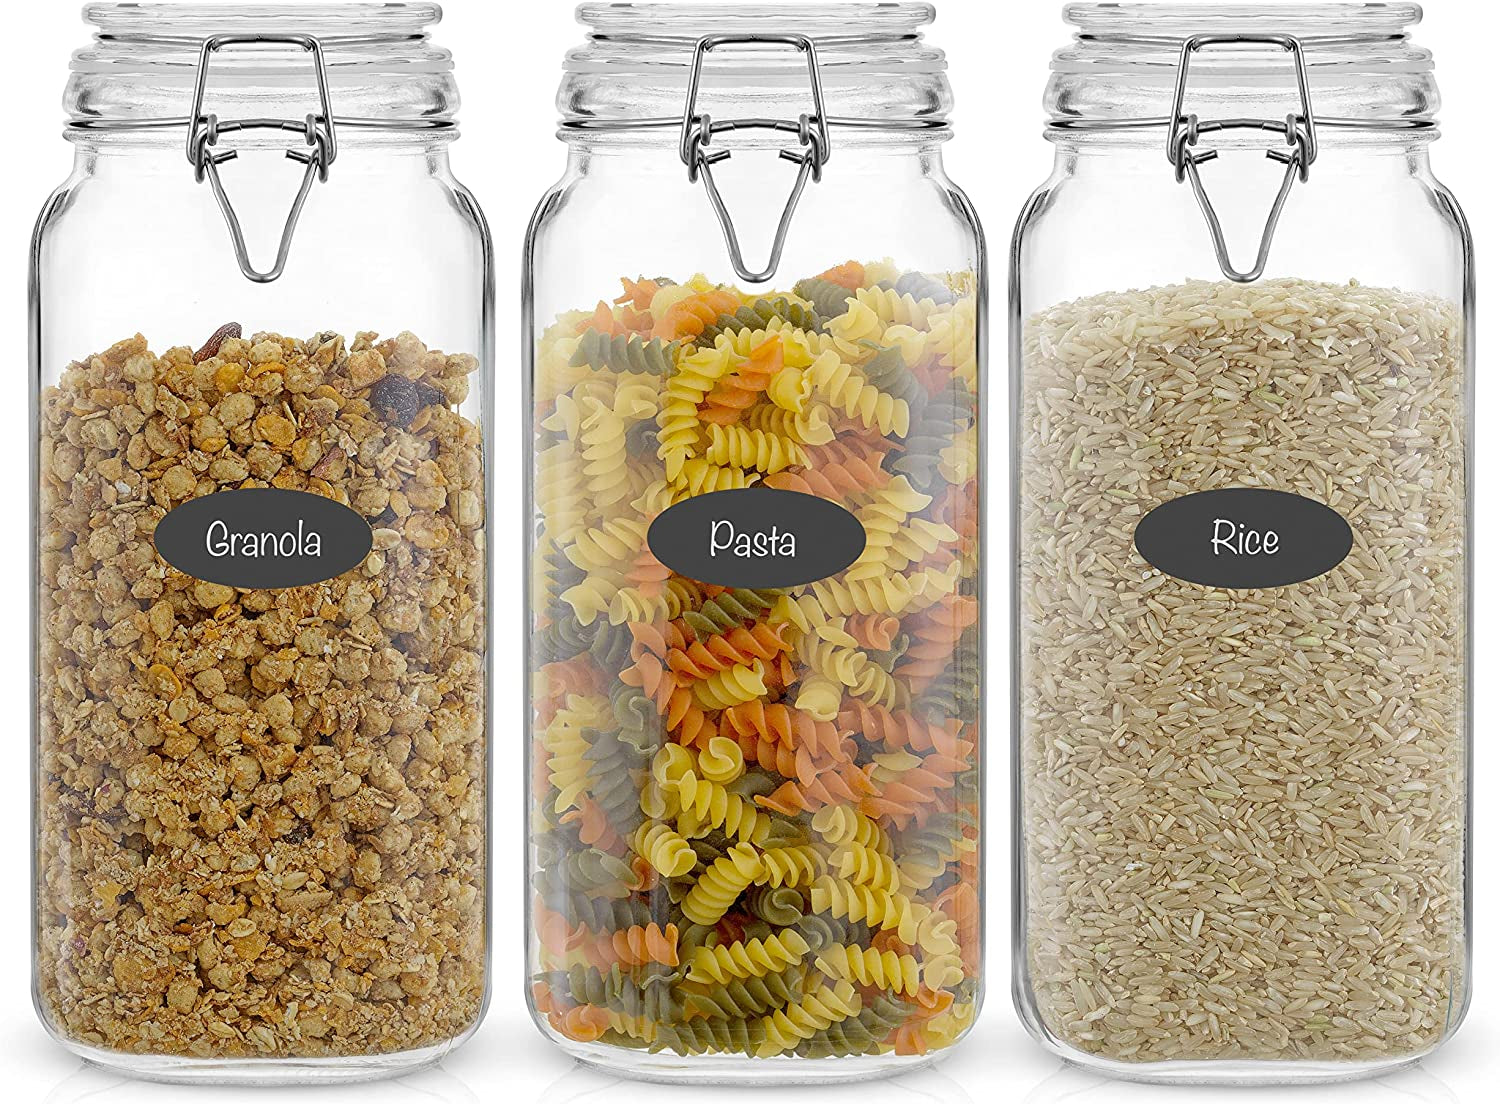 24 Pcs Glass Spice Jars/Bottles - 4oz Empty Square Spice Containers with  612 Spice Labels - Shaker Lids and Airtight Metal Caps - Silicone  Collapsible